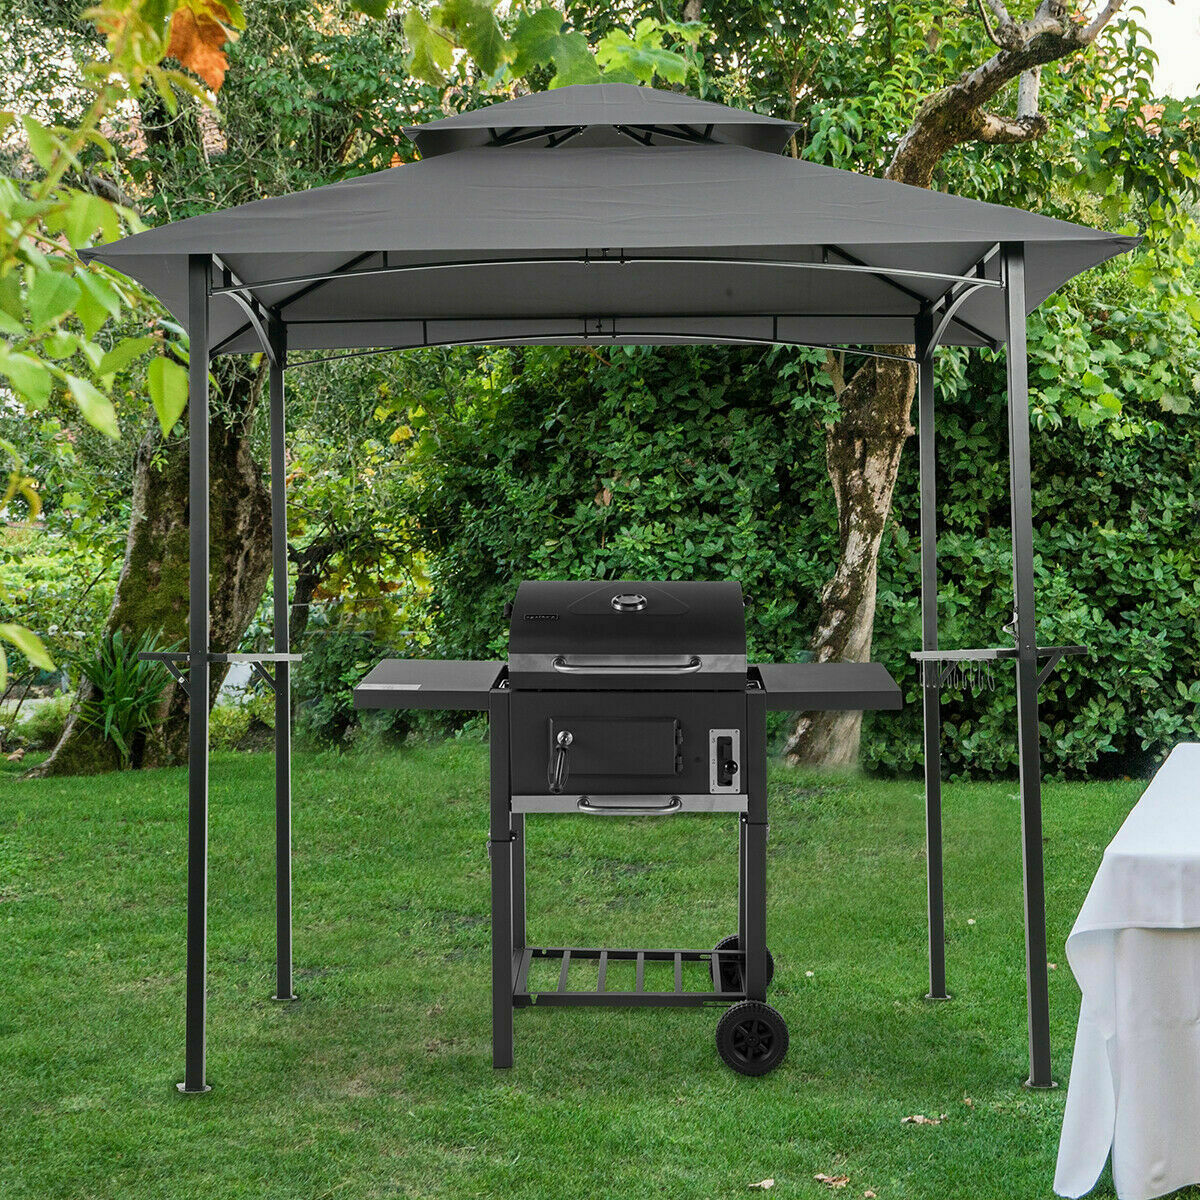 Details about   8'X5' Outdoor Barbecue Grill Gazebo Canopy Tent Patio BBQ Shelter W/Air Vent NEW 